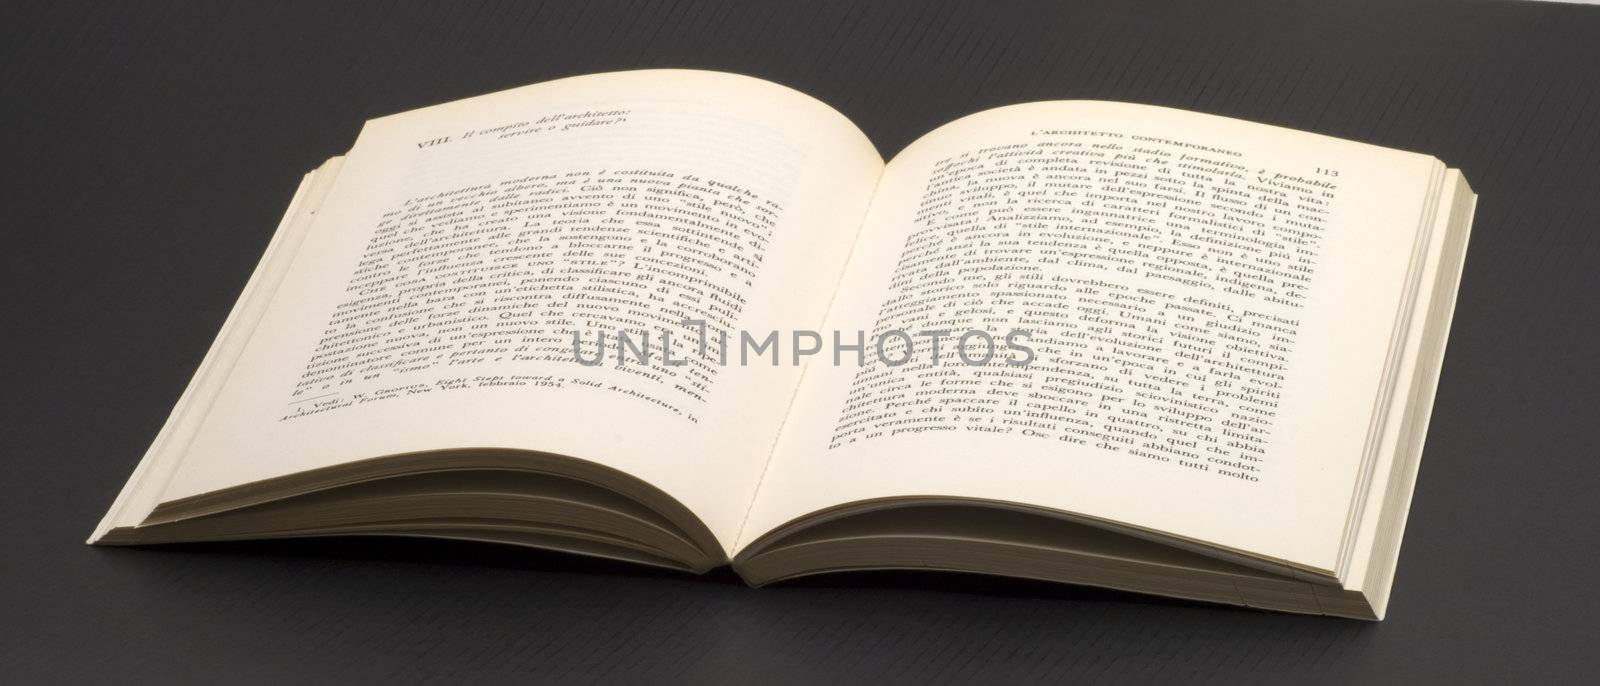 An open book on a black background